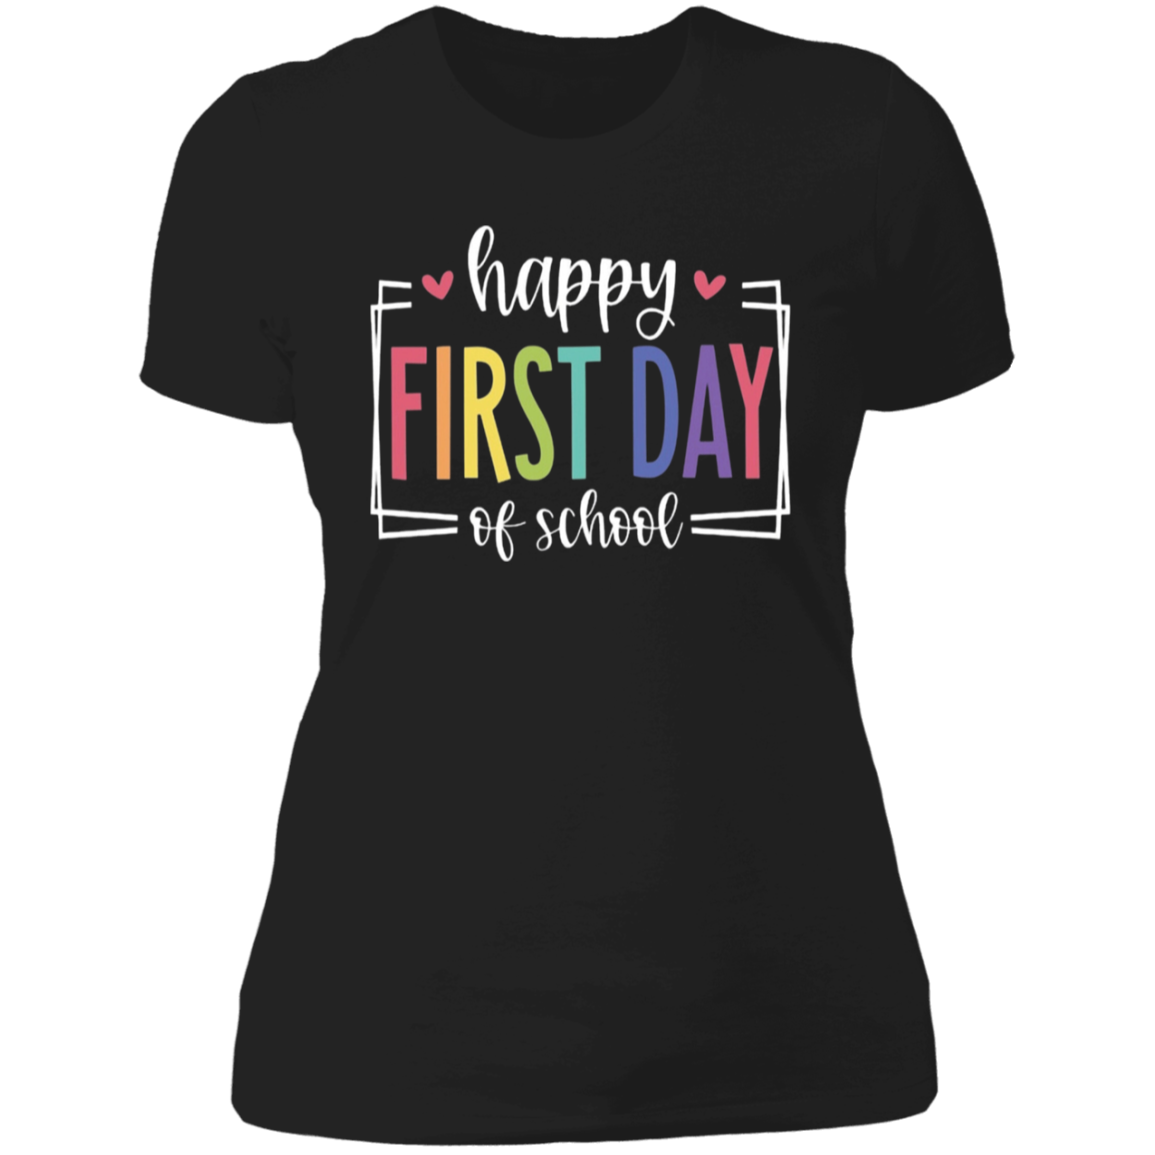 Happy First Day of School Tee